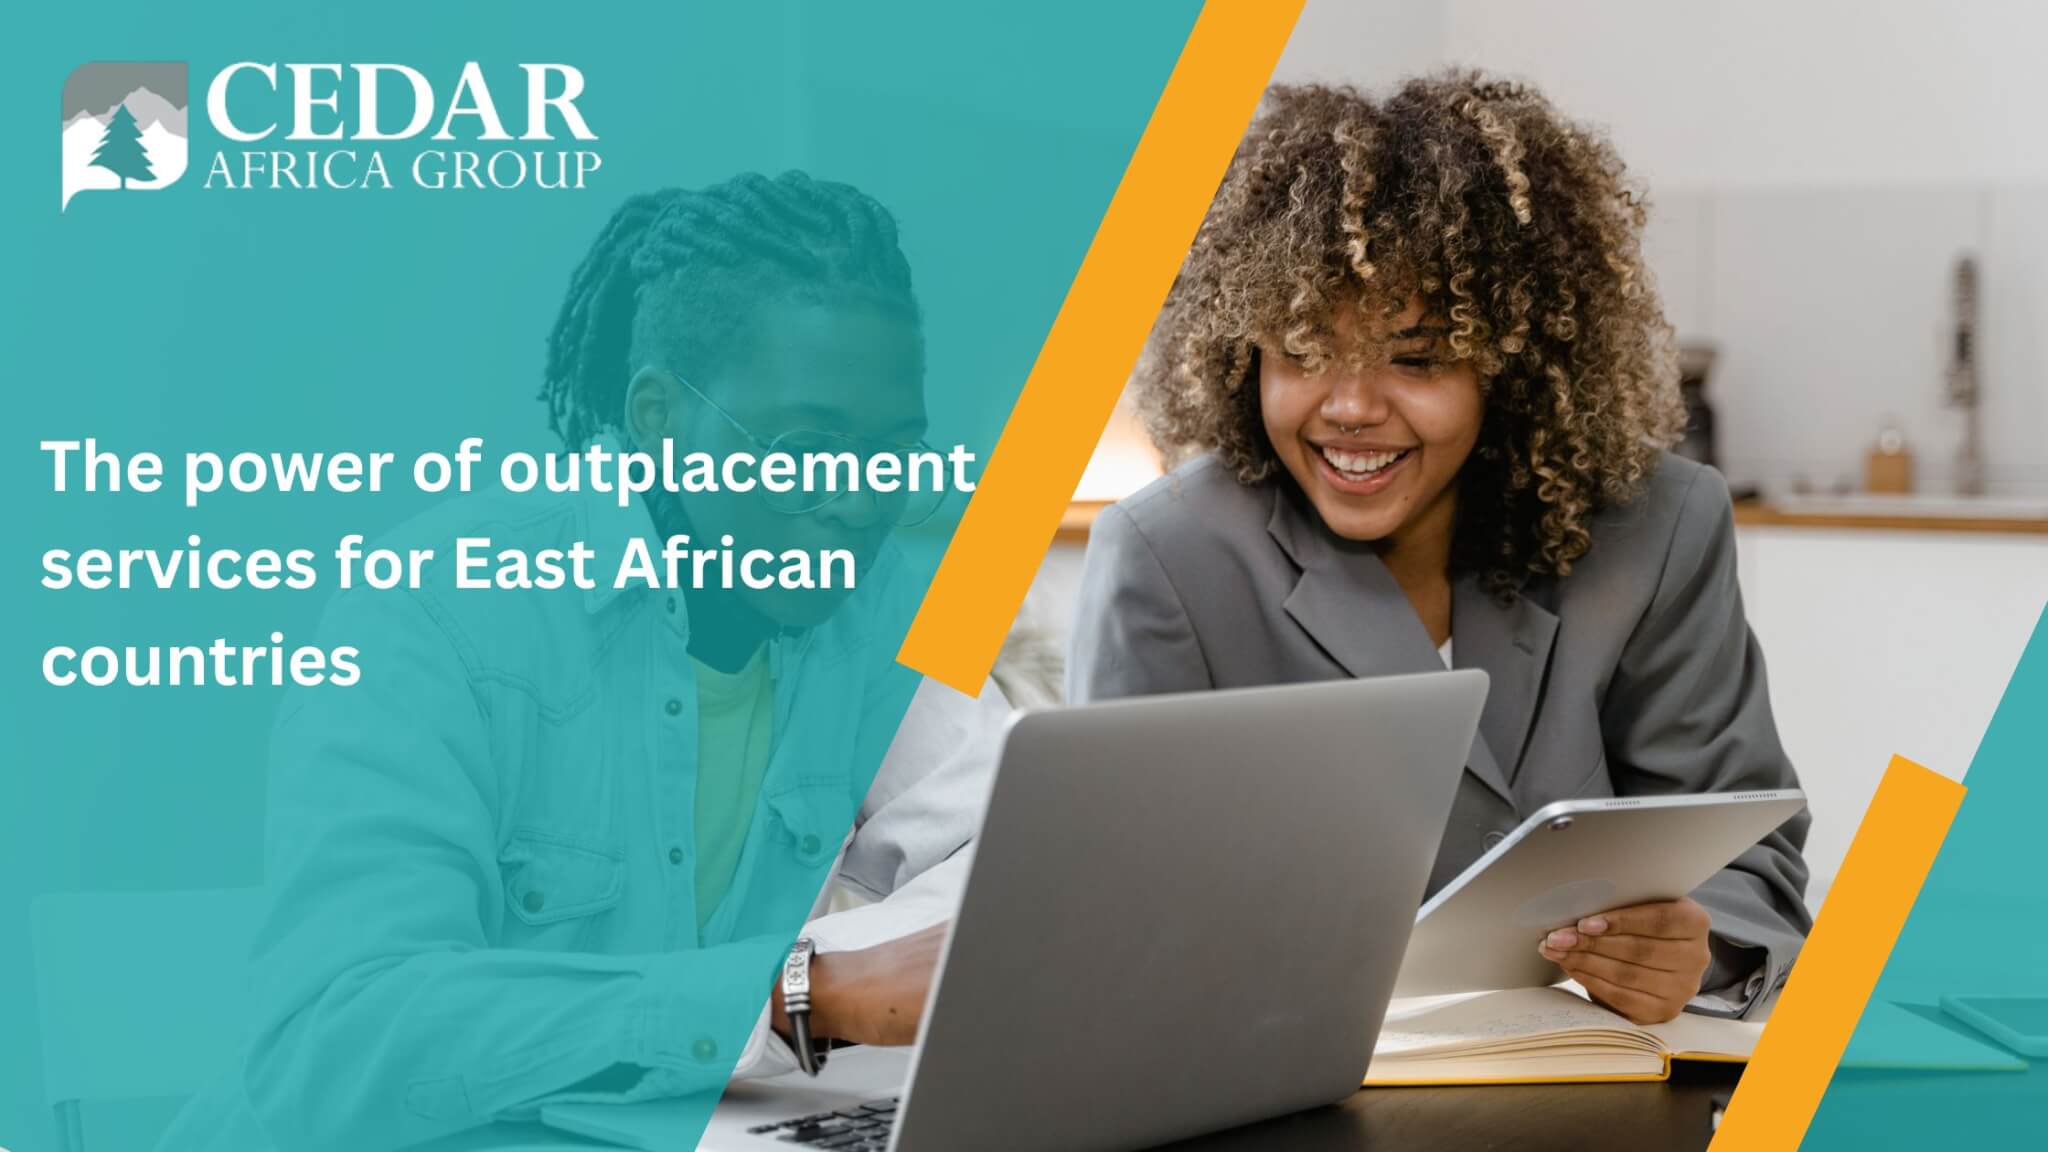 Woman laughing while studying with a man presumably on the power of outplacement and career coaching services for East African countries